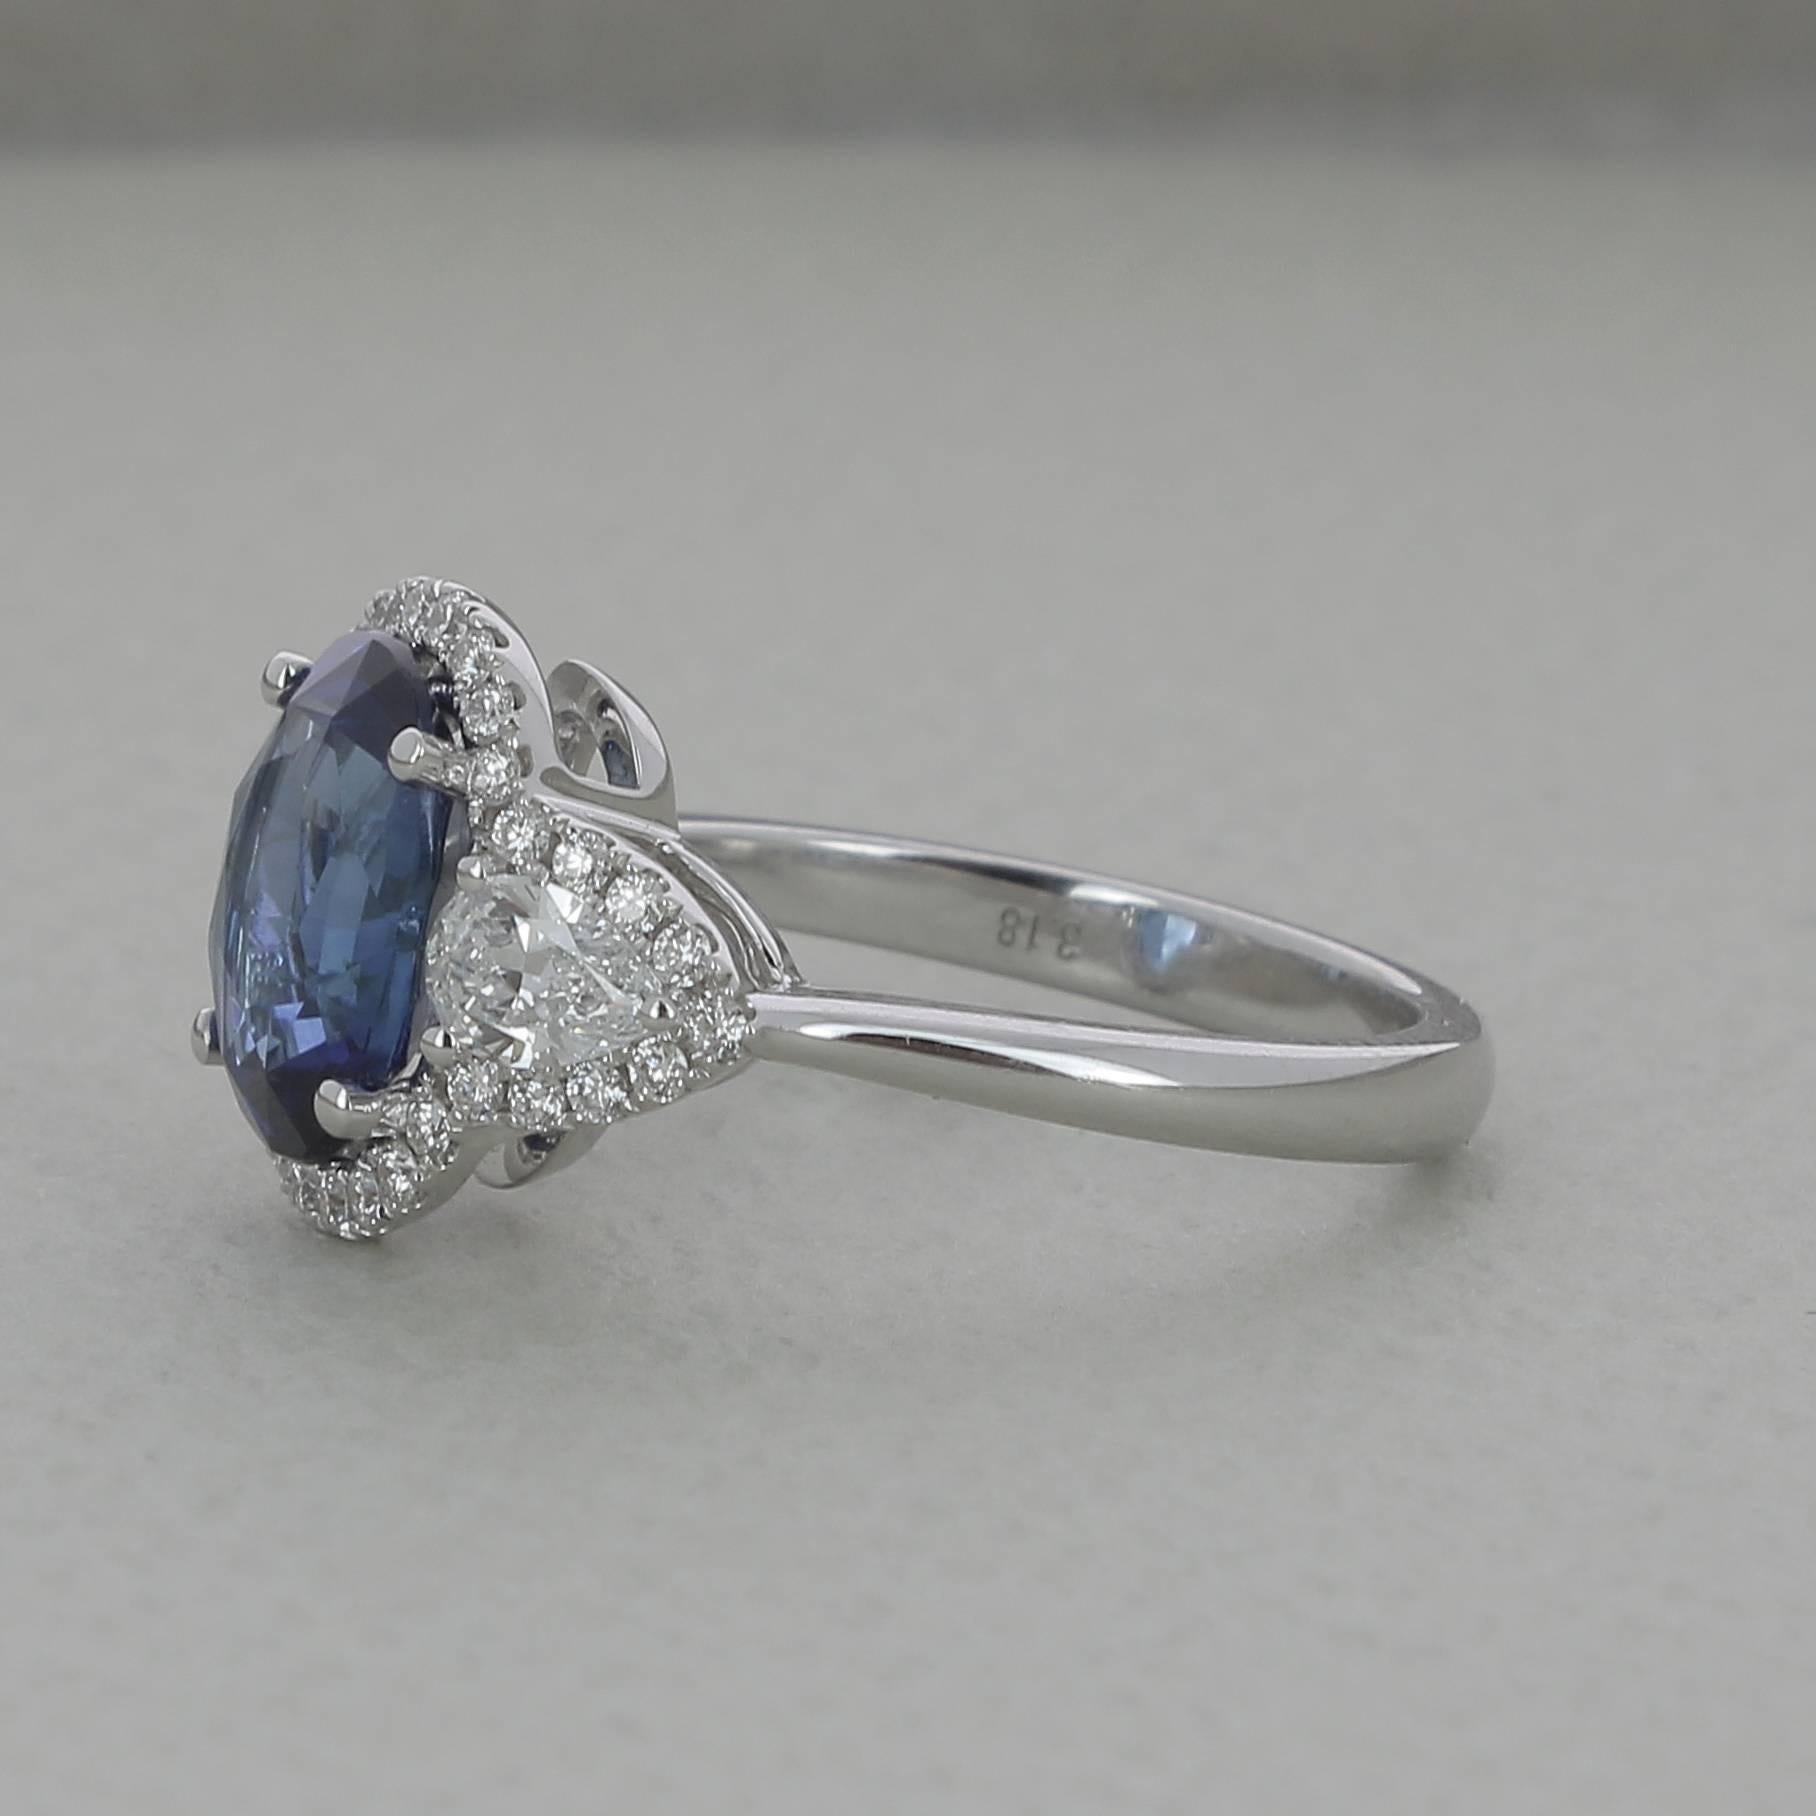 An extraordinary 18K White Gold Ring set with a No Heated Blue Sapphire weighing 3,18 carat and 2 Pear Diamonds weighing 0,50 carats.
The Ring is surround with an halo of sparkling of GVS White Diamonds.
The Blue Sapphire is certified as a Ceylon